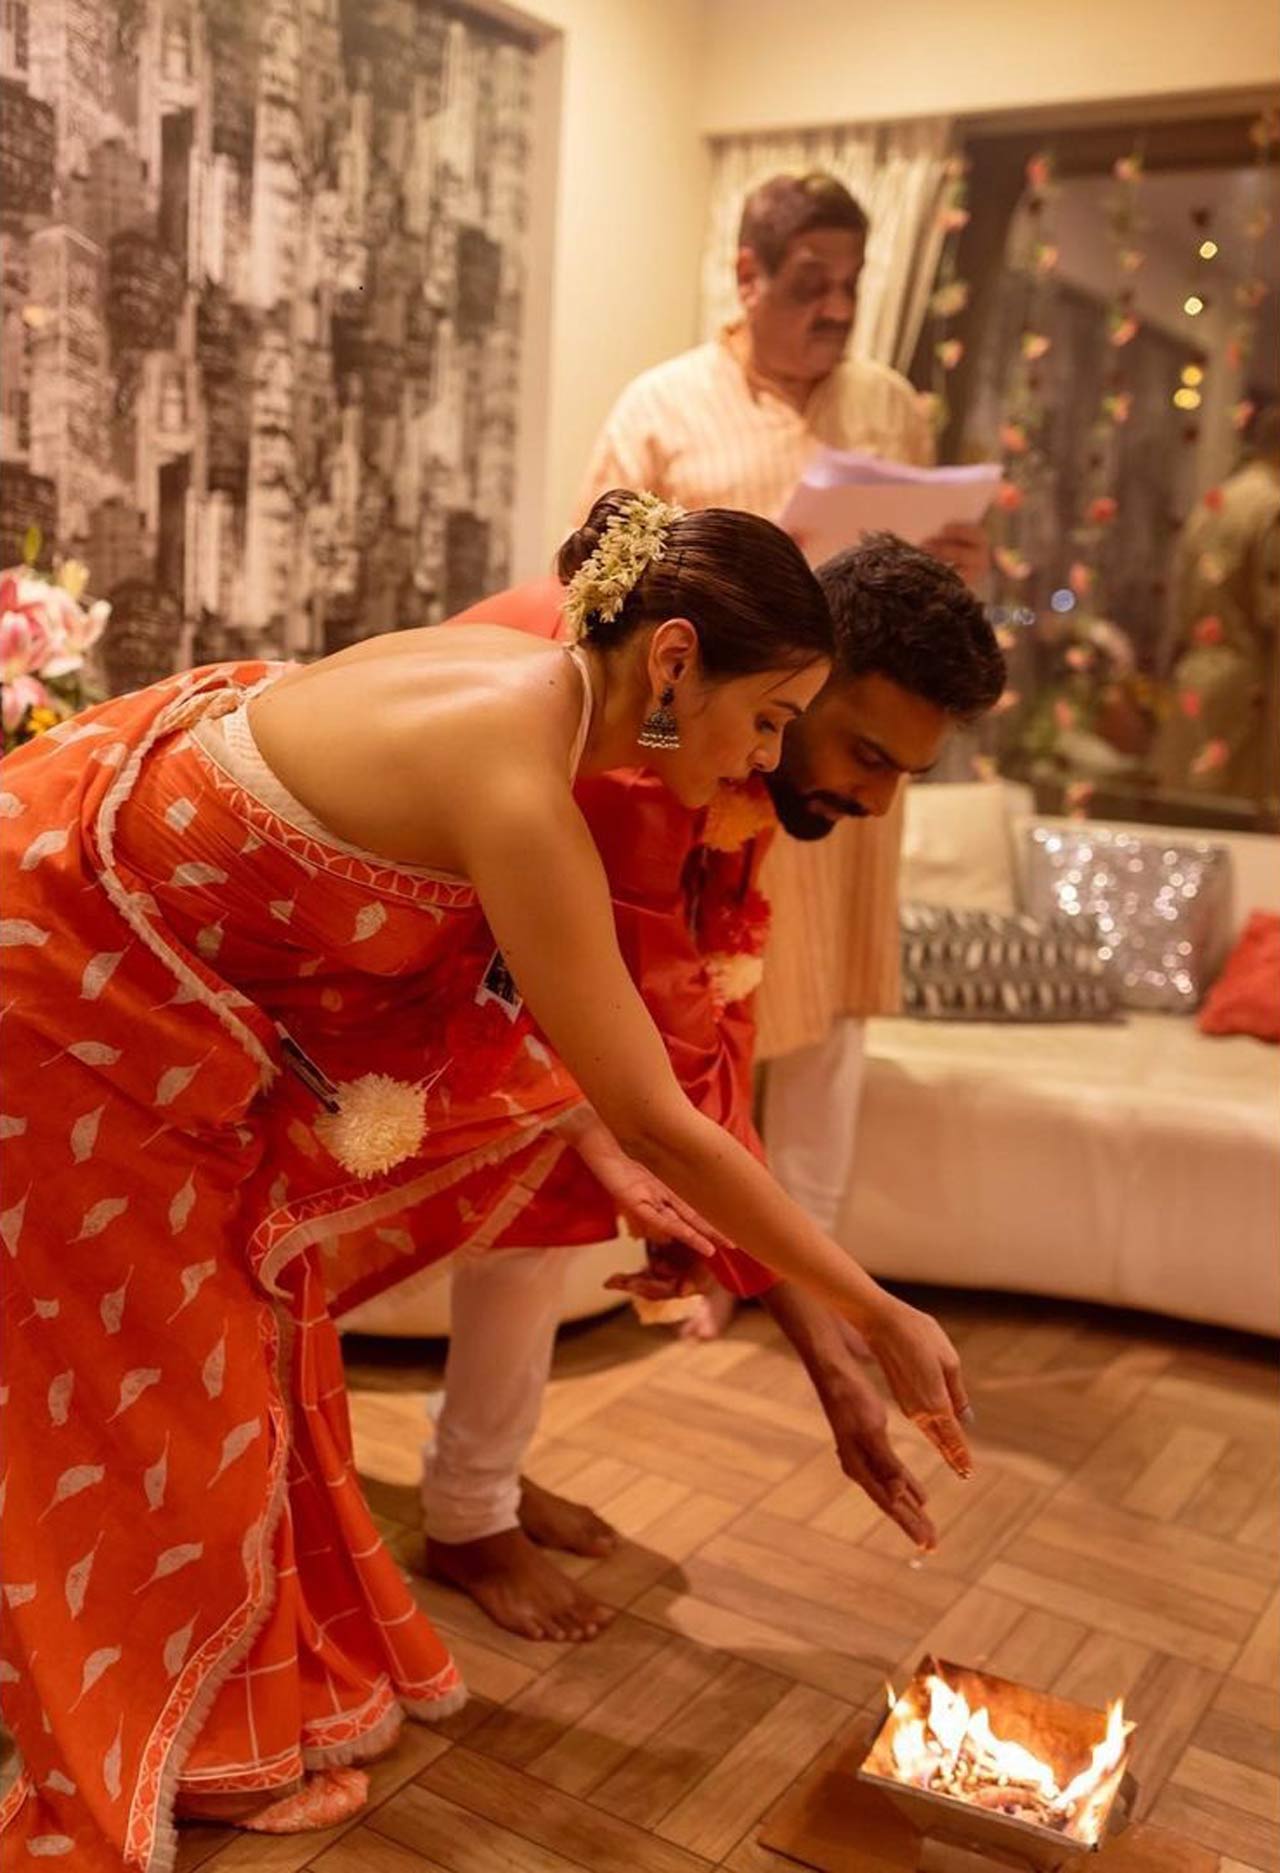 Singer Shalmali, who is best known for her songs 'Balam Pichkari', and 'Lat Lag Gayee', among others, recently tied the knot with beau Farhan Shaikh. Taking to Instagram, Kholgade said she got married to Shaikh, a sound engineer, on November 22 in an intimate ceremony that was held at her Andheri residence.
 
 
 
 